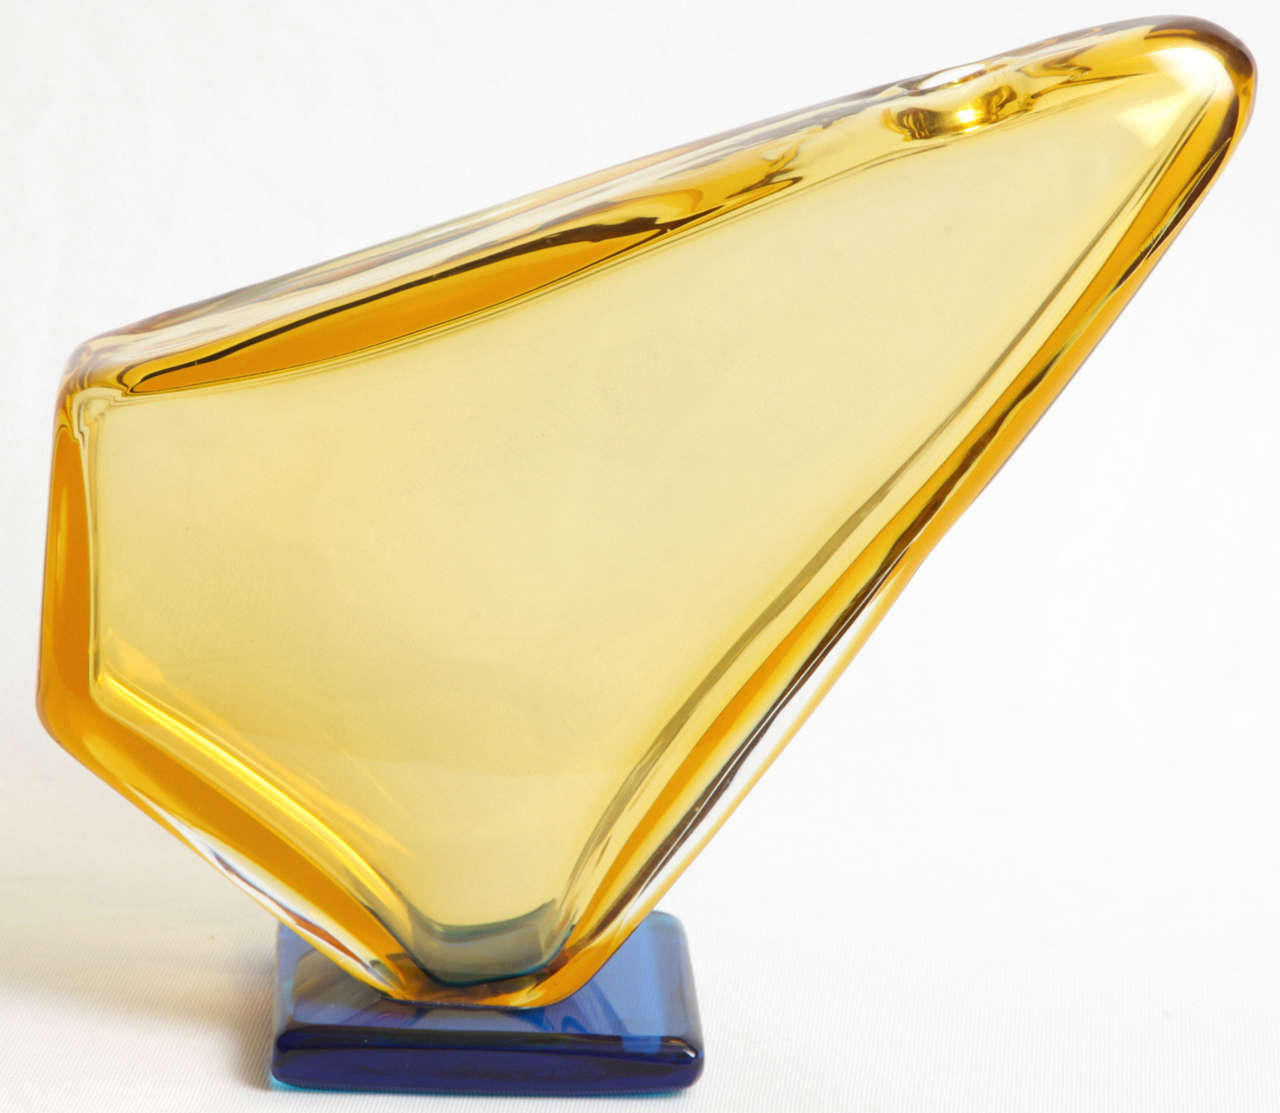 A vase/sculpture in amber and blue glass by the Italian sculptor Napoleone Martinuzzi (1892-1977) and executed by the Venitian master glass-blower Alfredo Barbini (1912-2007) for his own glassworks in Murano (IT).
Engraved signature 'Barbini,